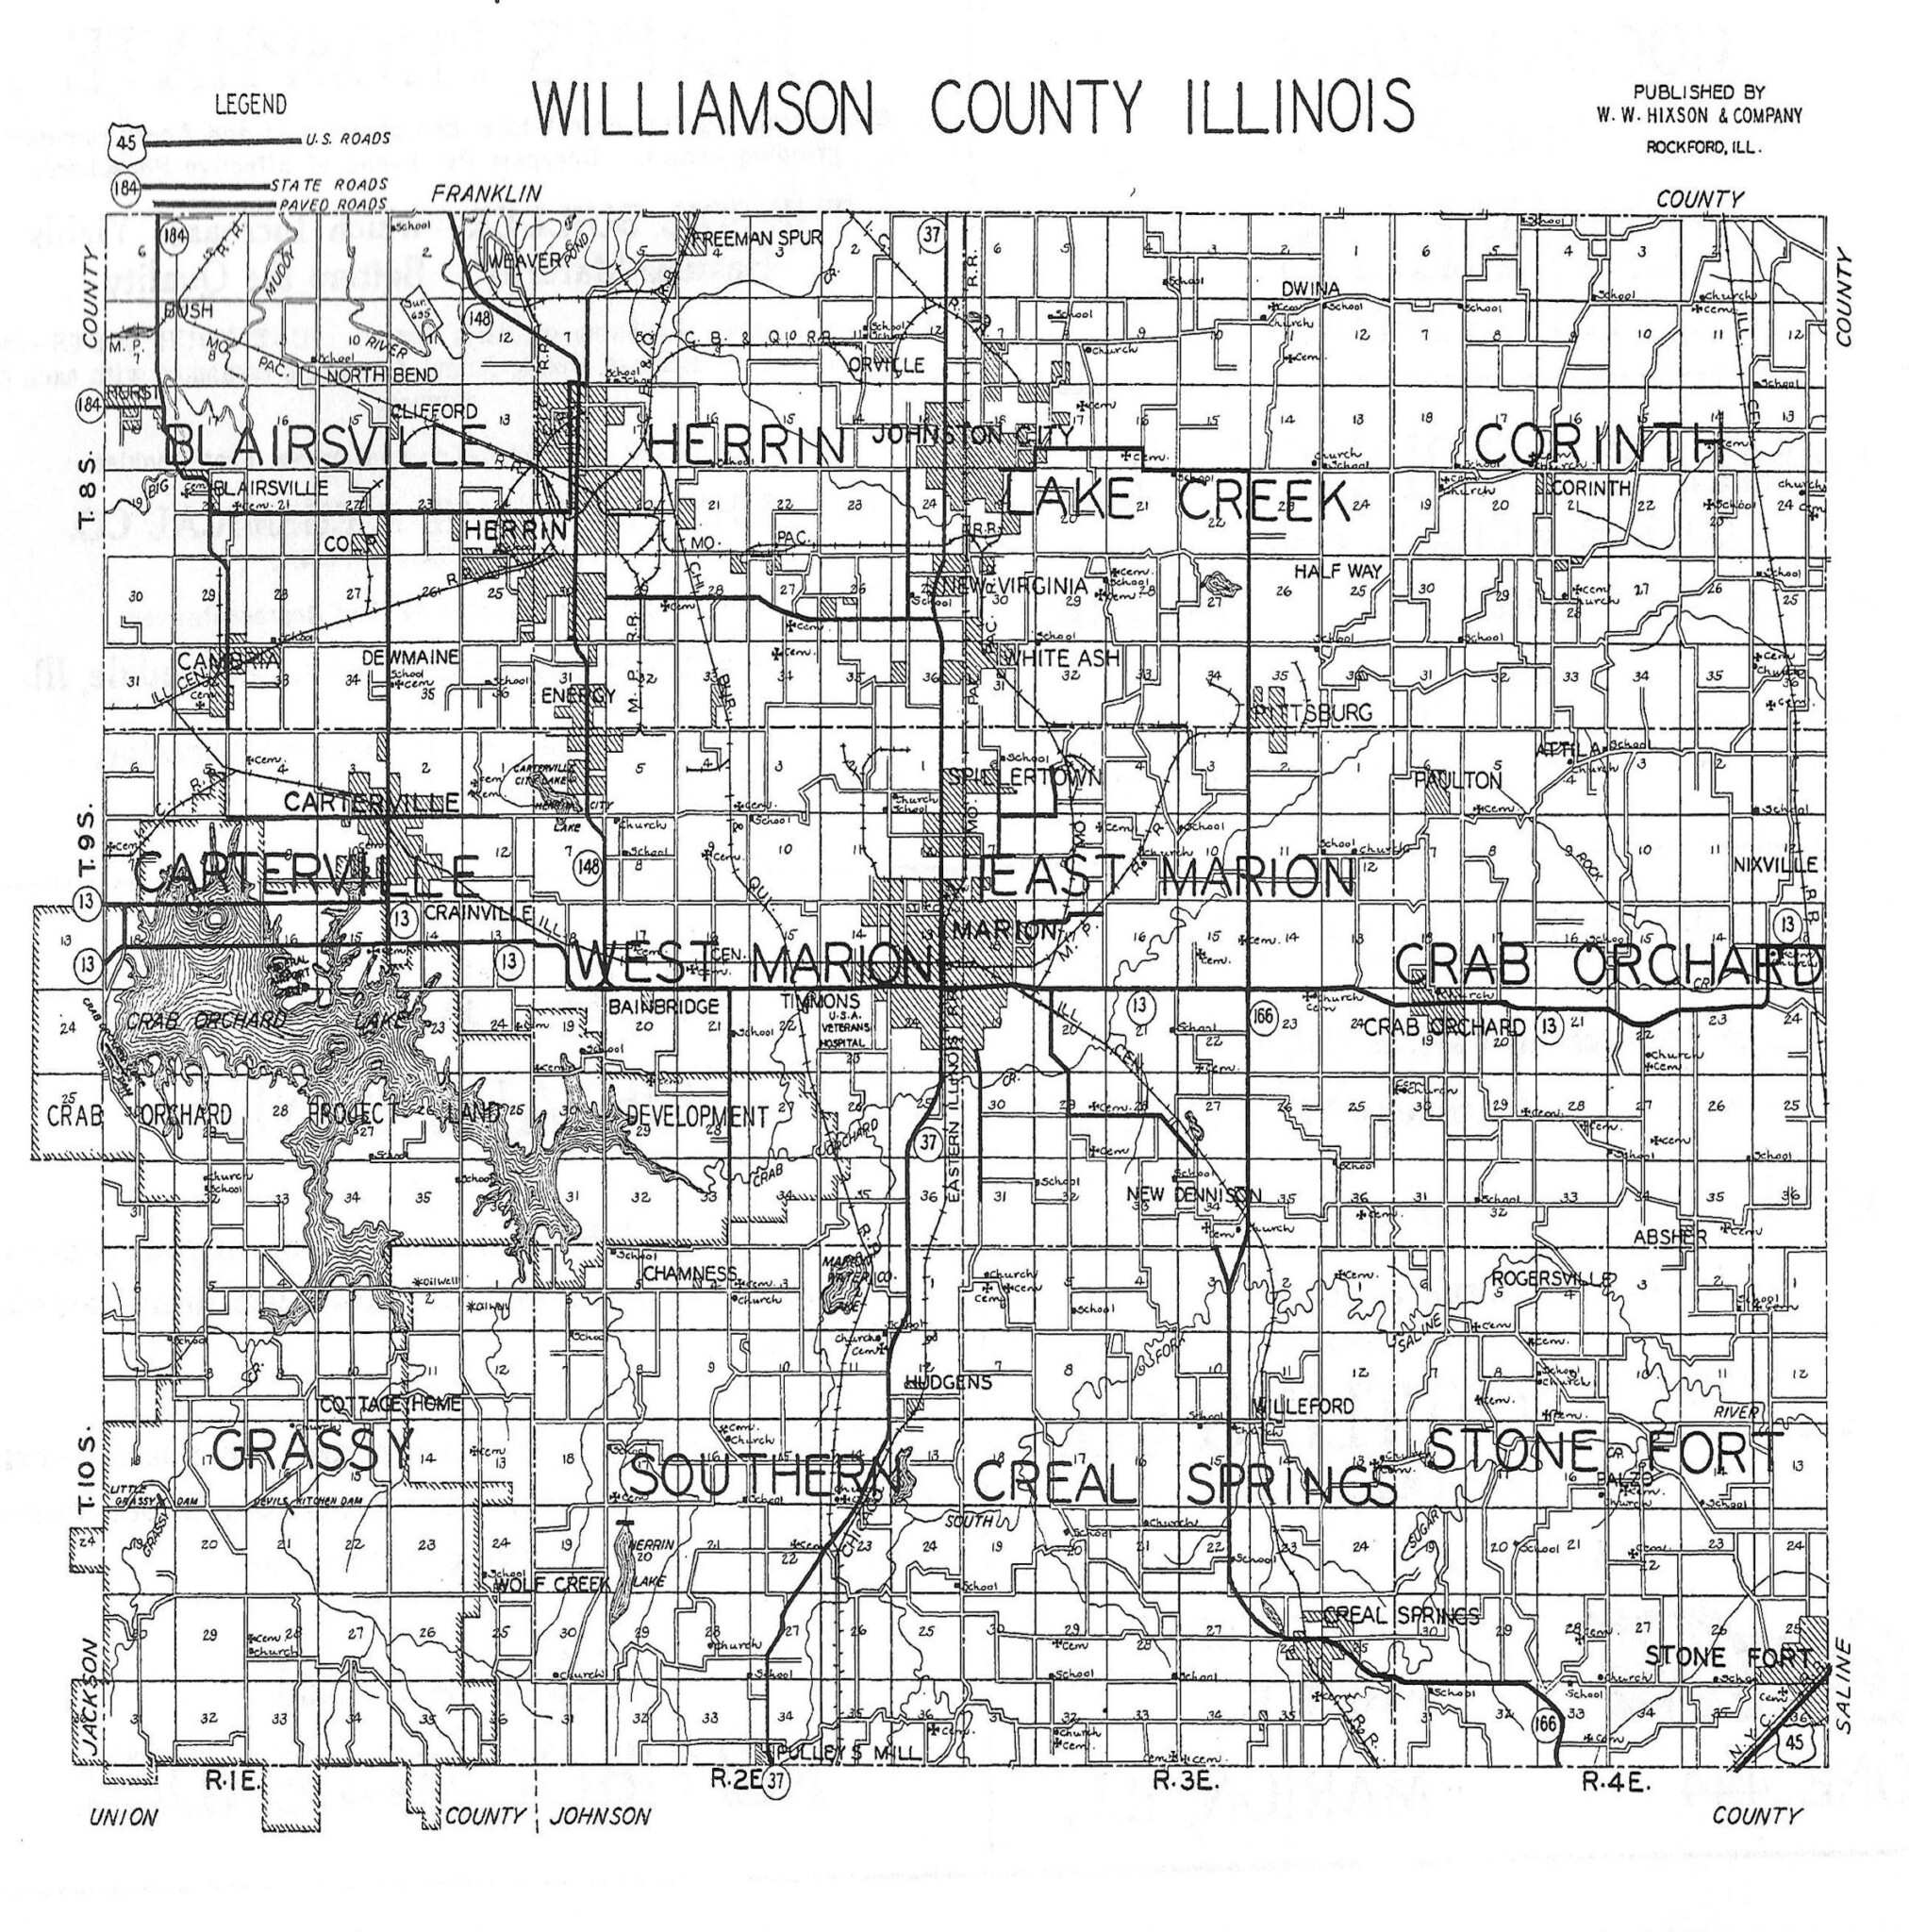 1940 Williamson County Plat Maps Marion Illinois History Preservation 0812